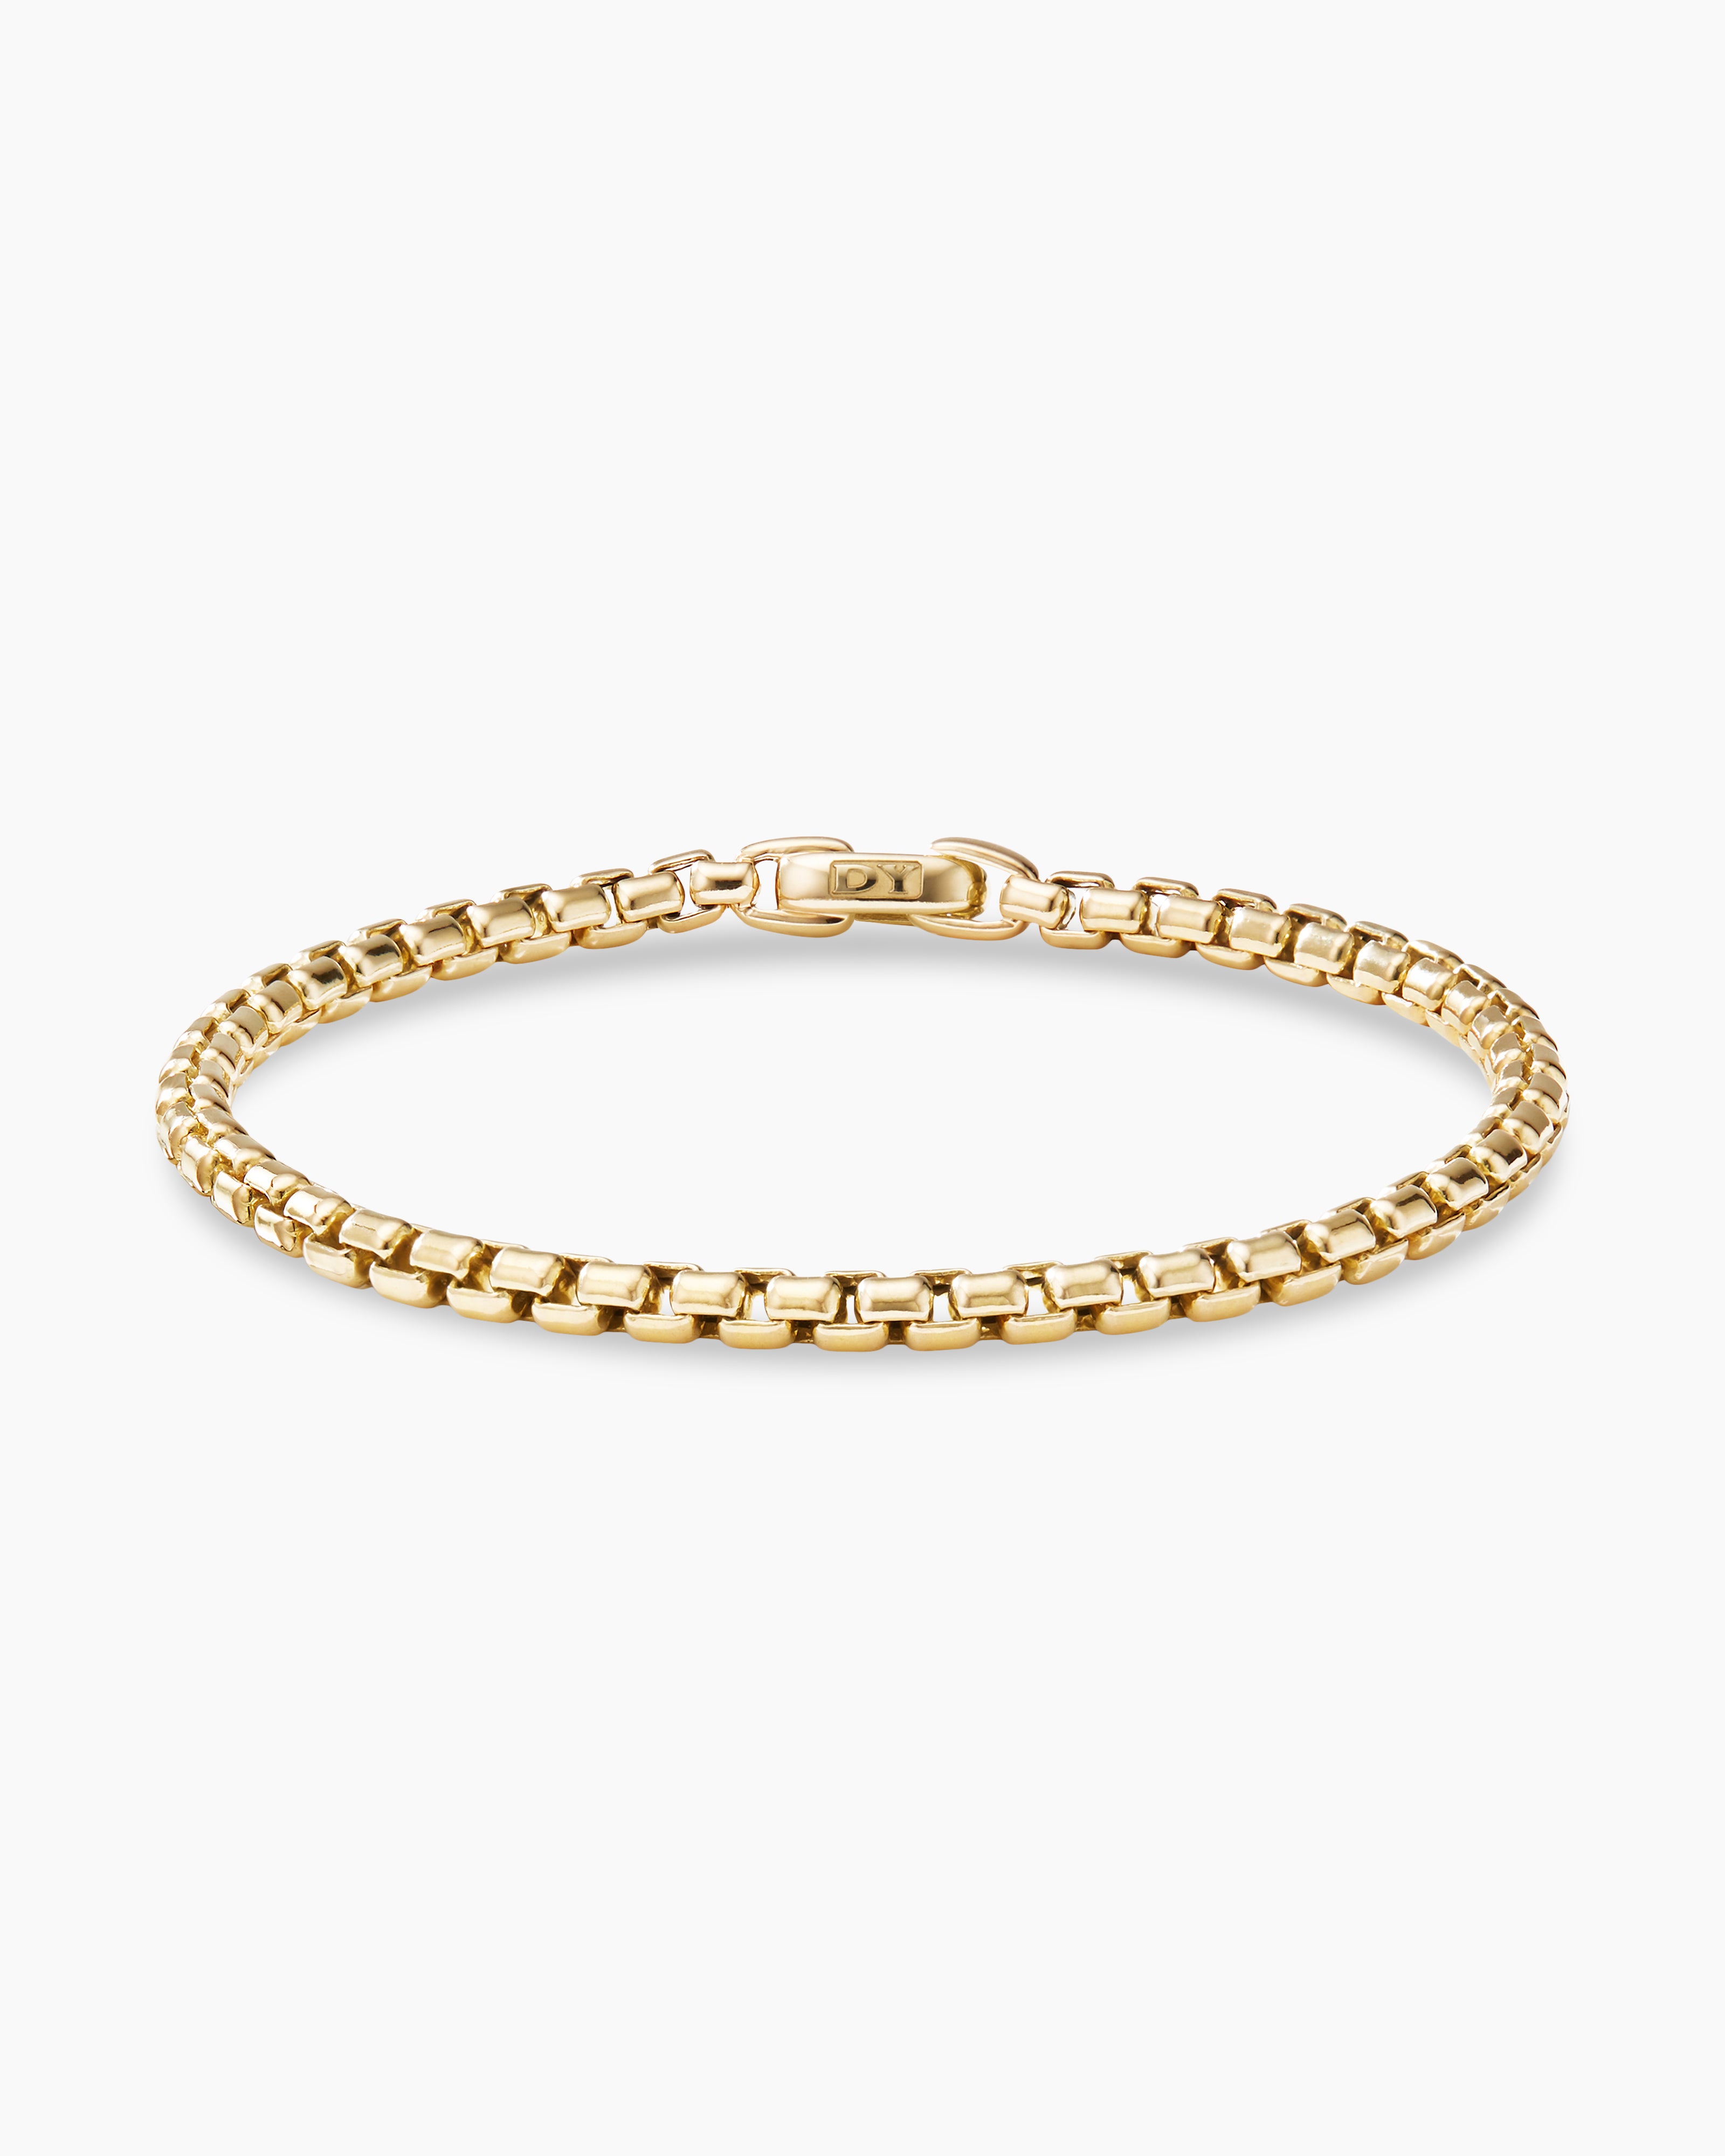 Rounded Box Link Chain Bracelet in 14K Gold - Yellow Gold